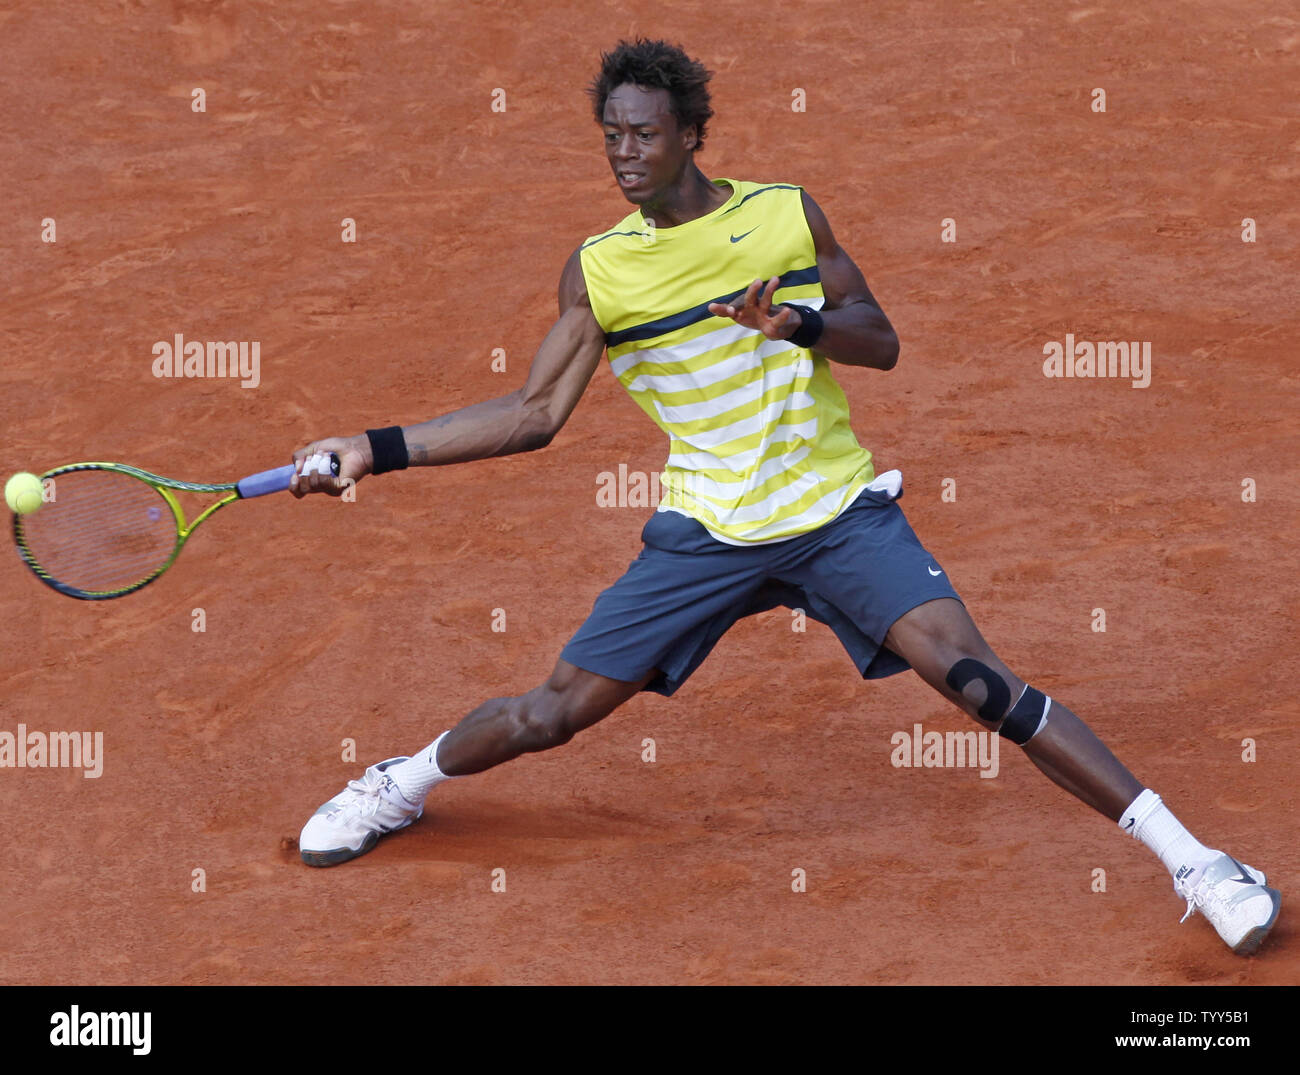 Frenchman Gael Monfils hits a shot during his French Open quarterfinal match  against Roger Federer of